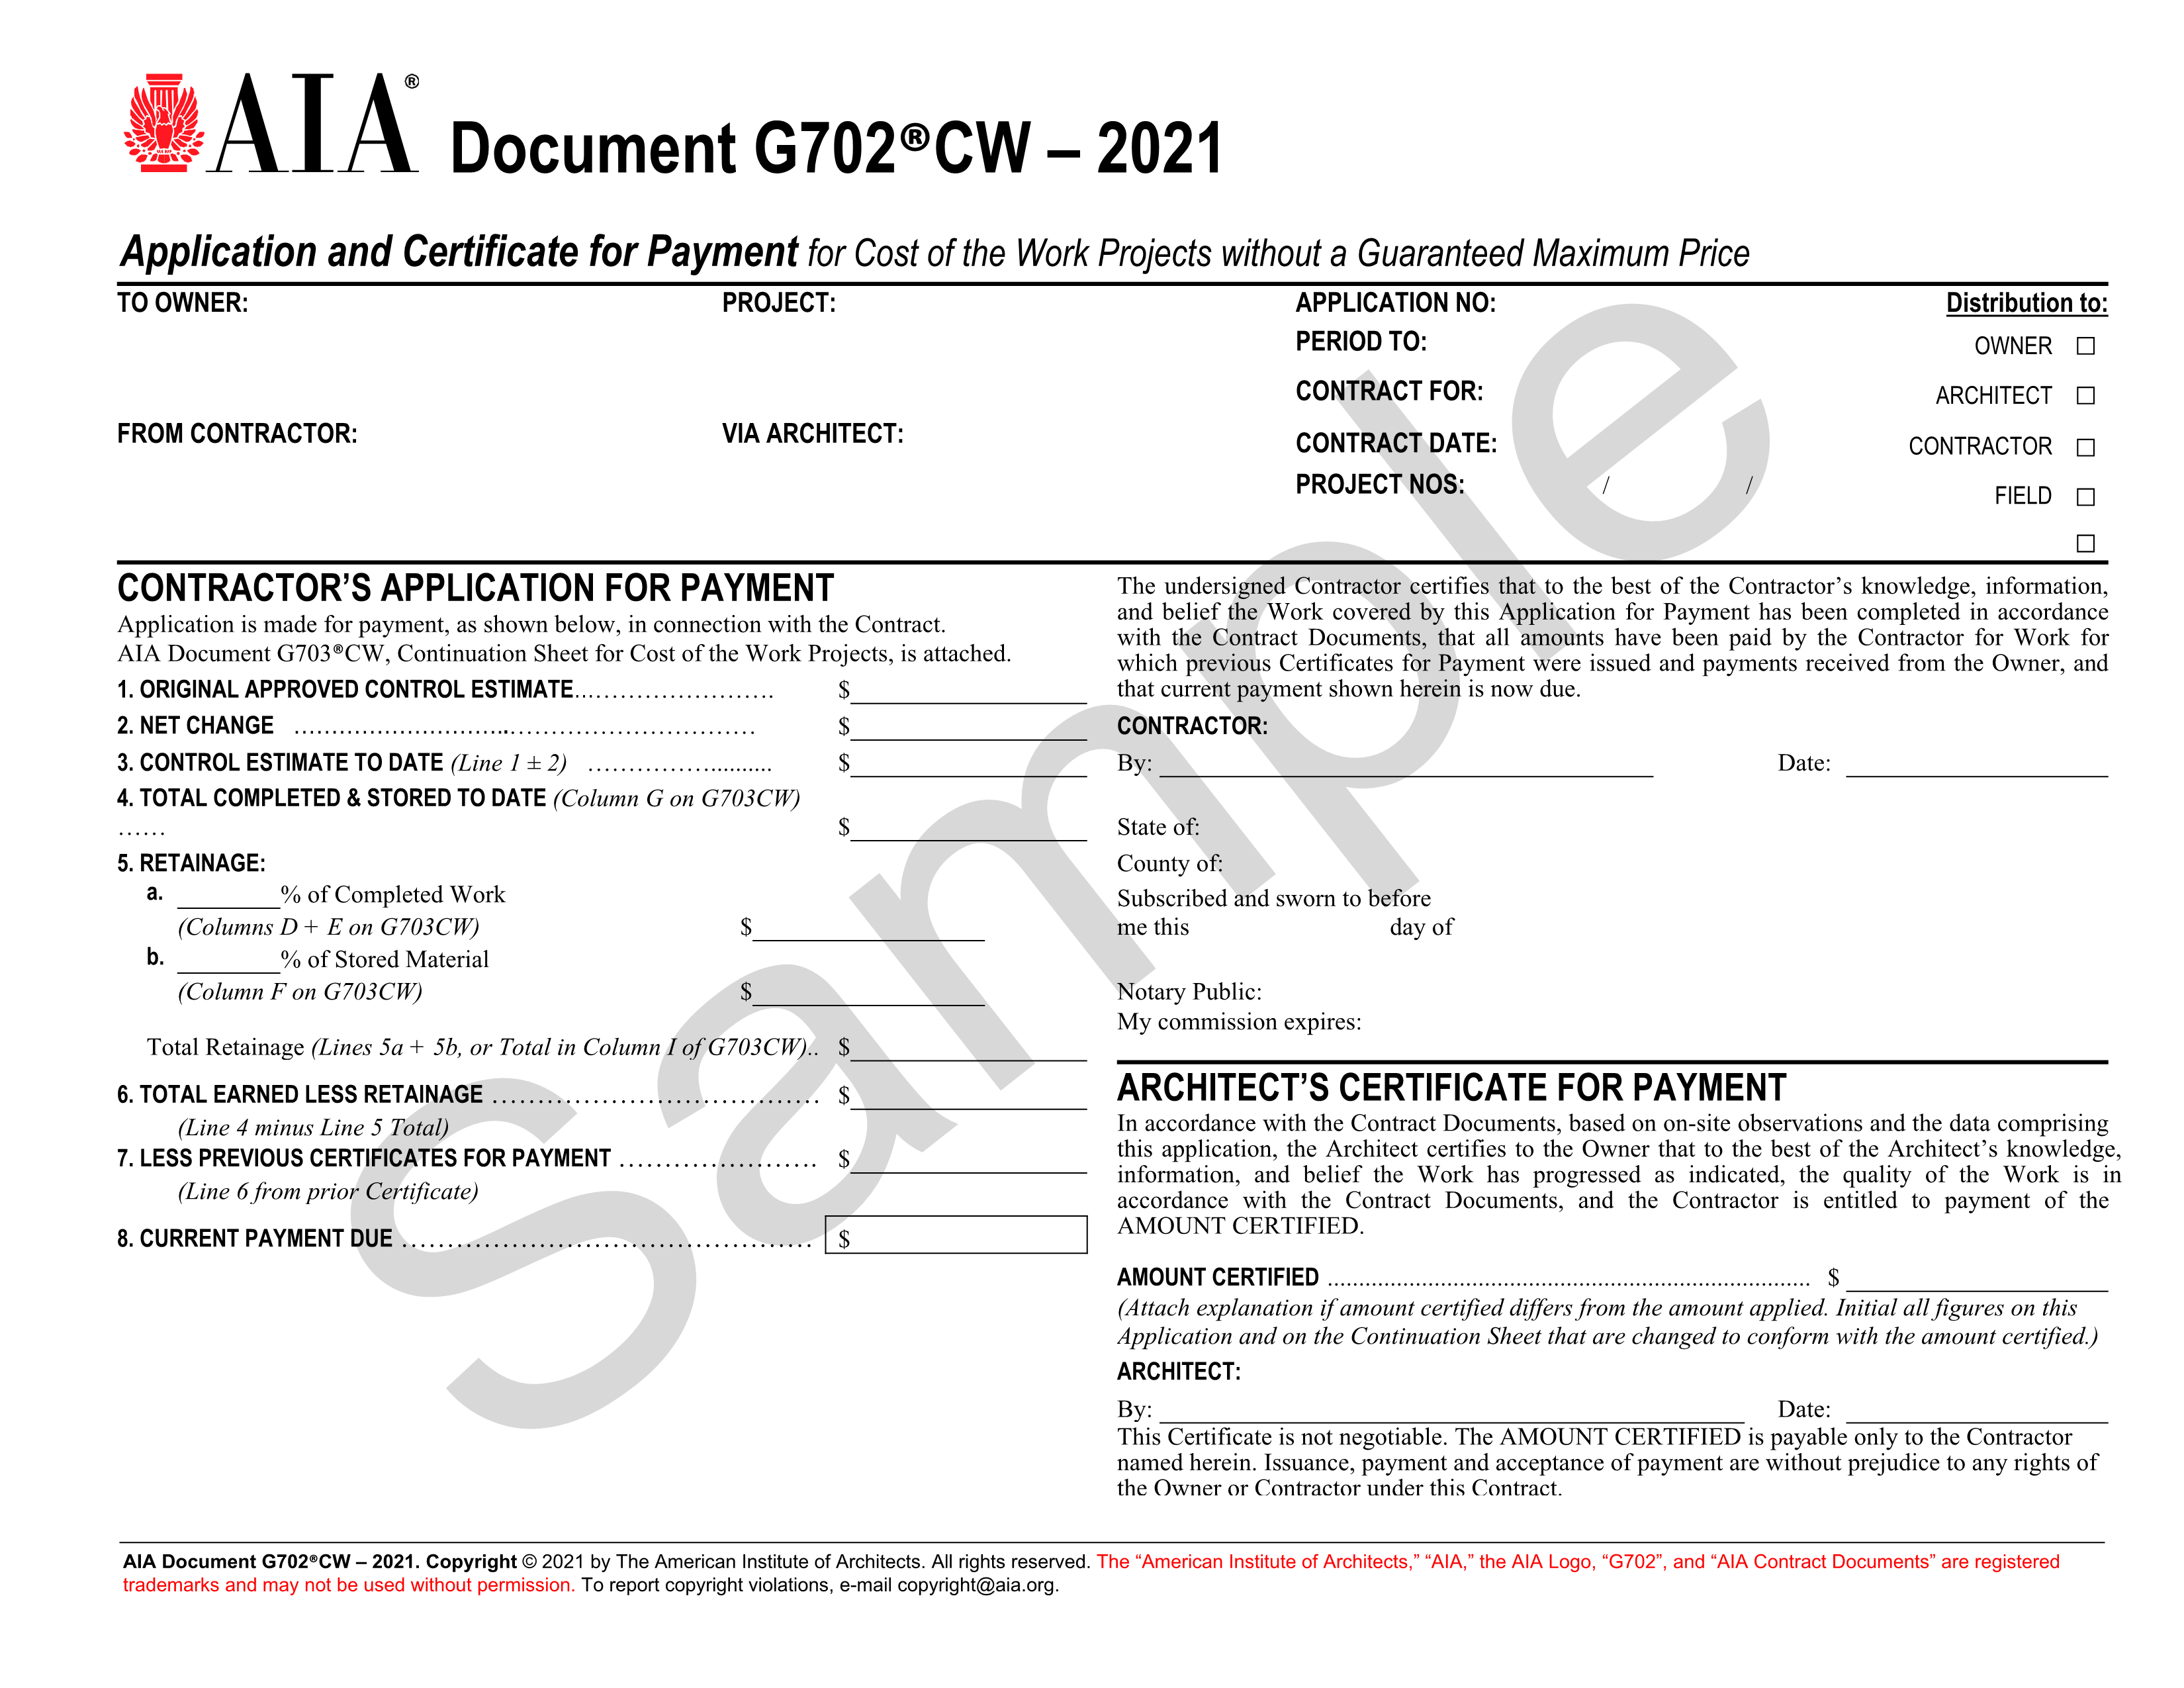 aia-g702-cw-application-and-certificate-for-payment-gmp-industry-standard-form